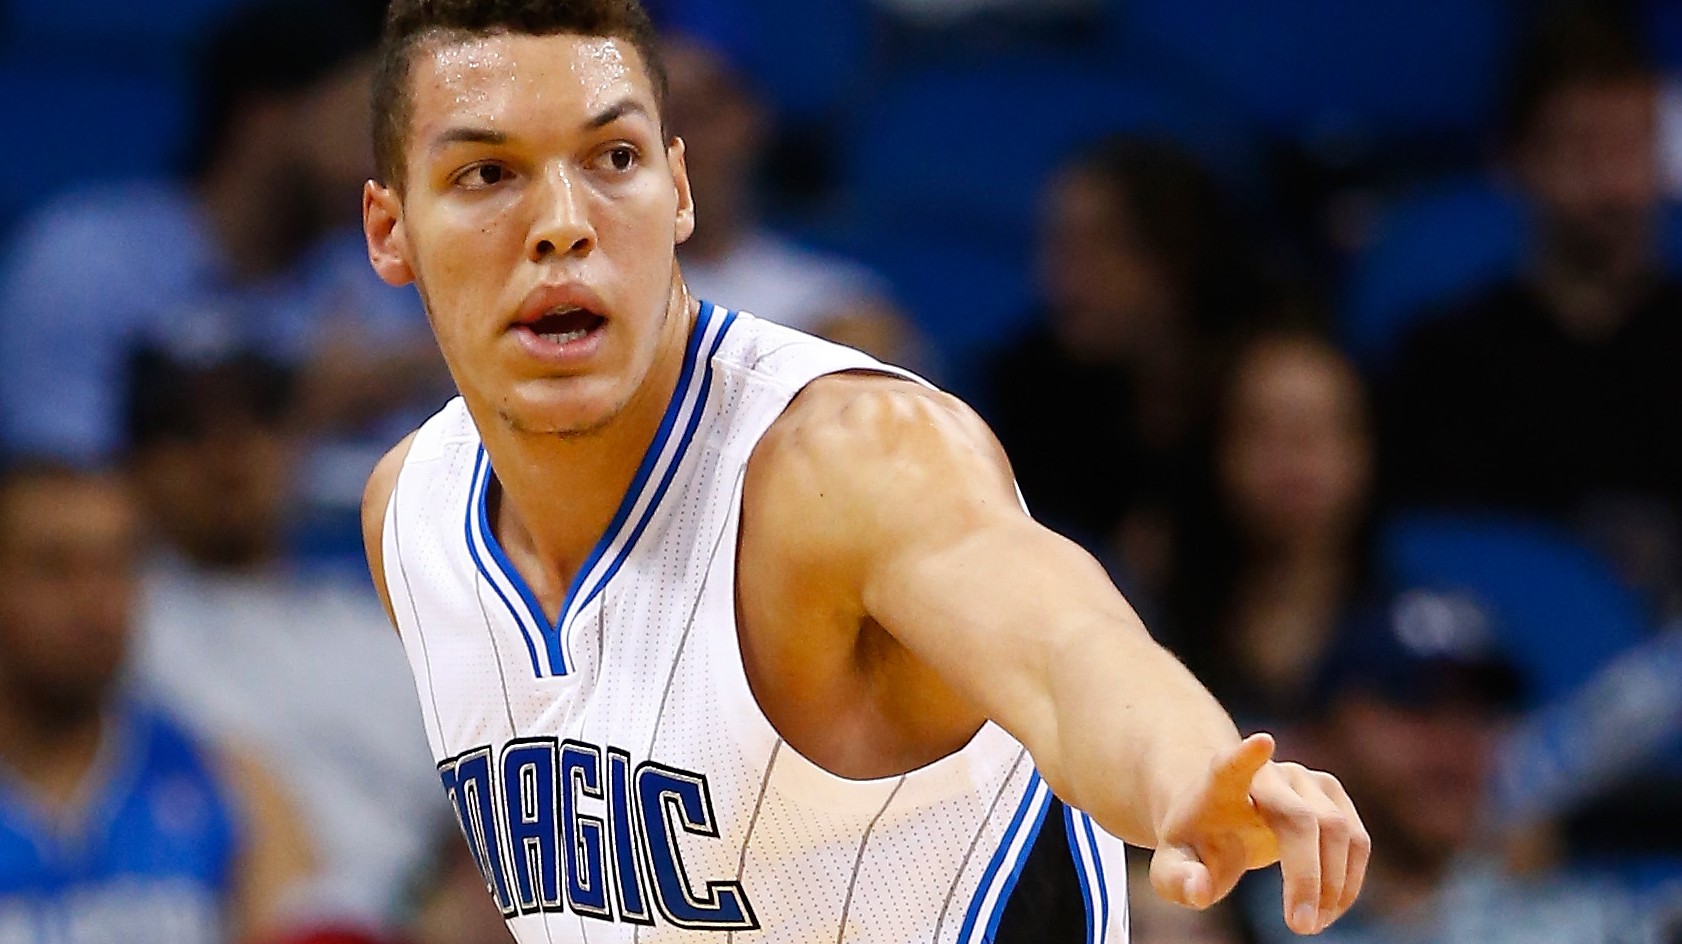 Aaron Gordon went out of his mind in the 2016 dunk contest finals (Video)